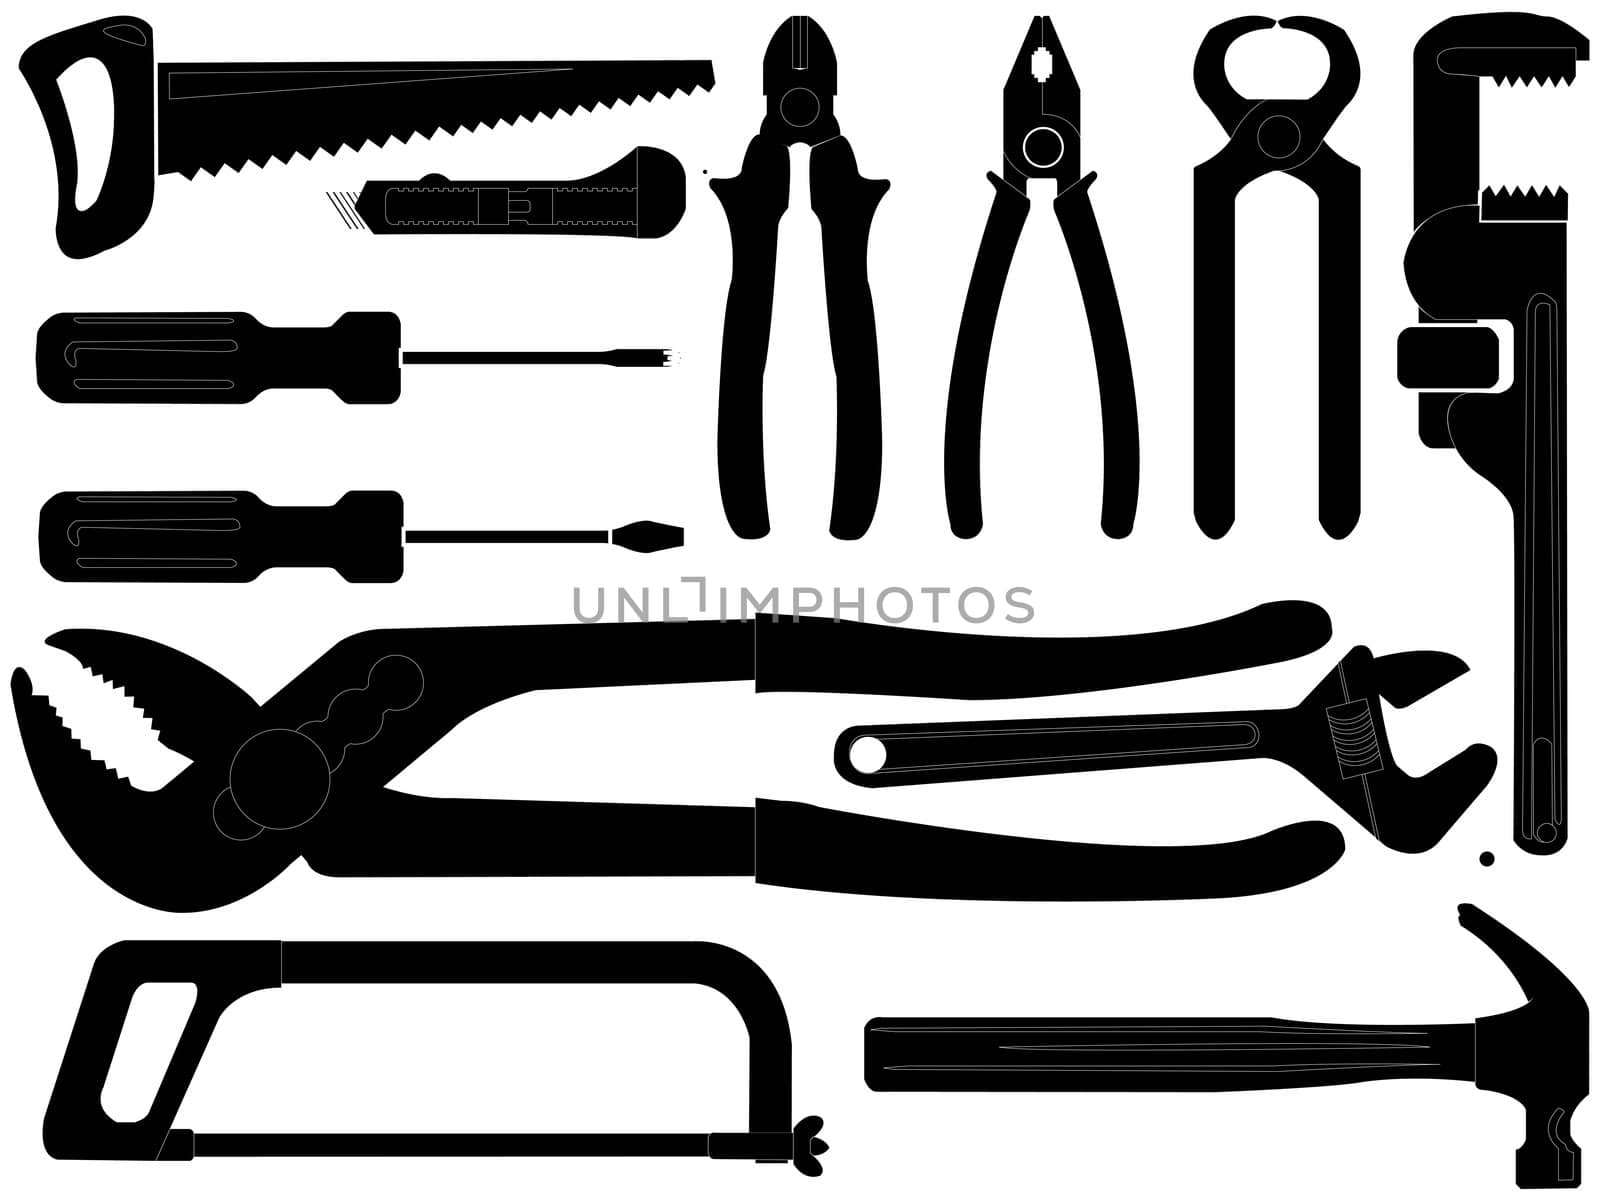 hand tools black silhouettes over white background, abstract vector art illustration